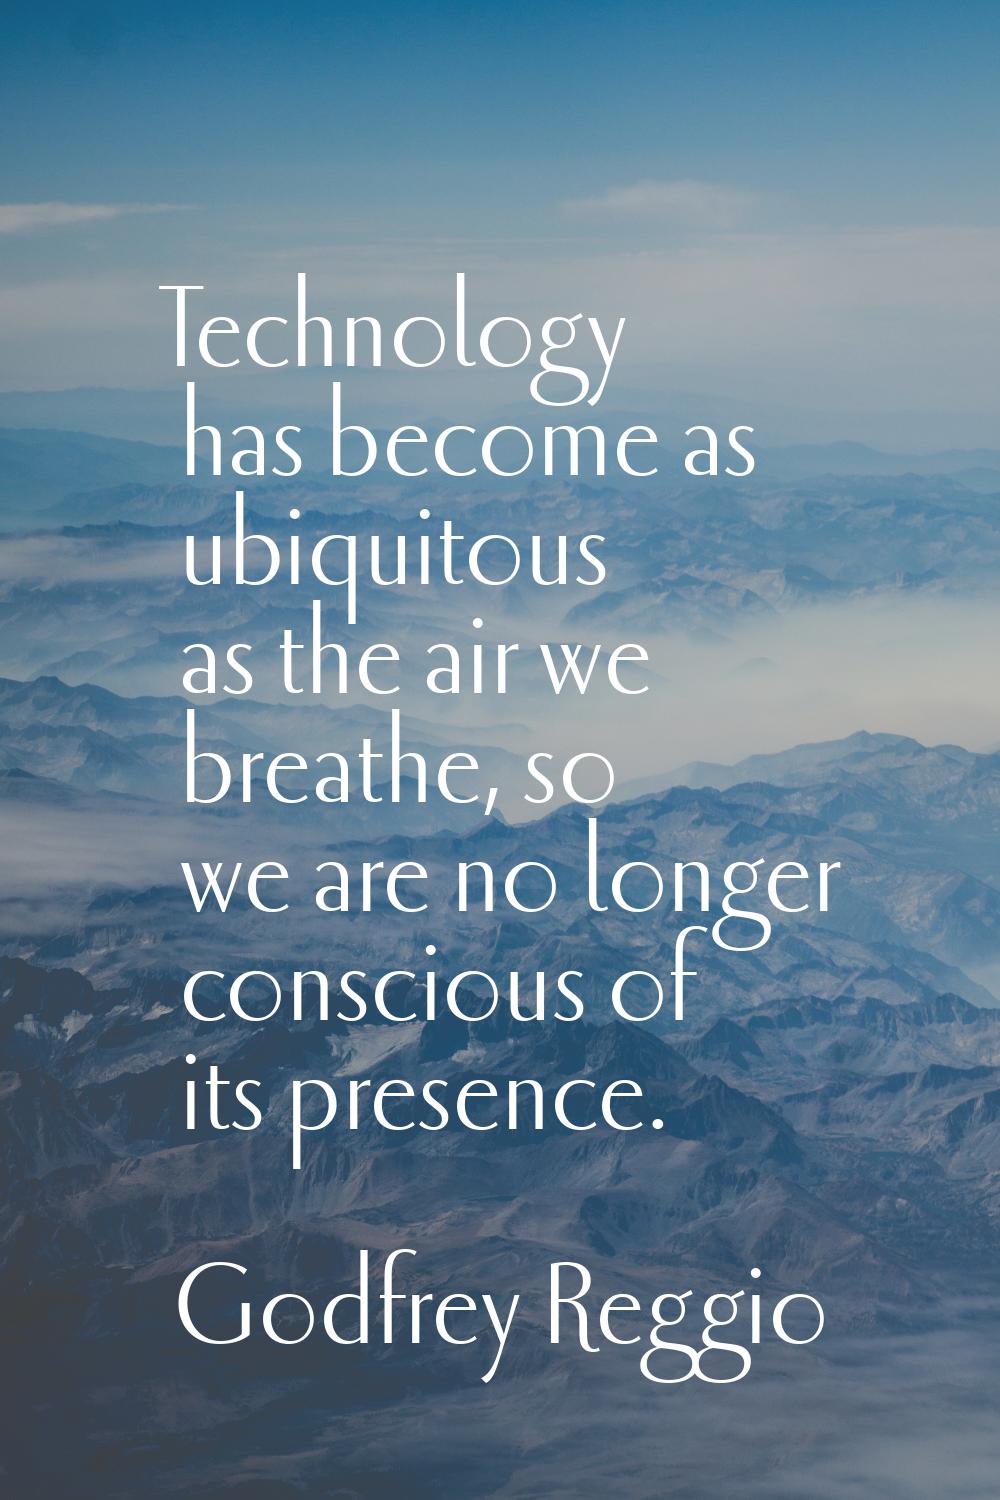 Technology has become as ubiquitous as the air we breathe, so we are no longer conscious of its pre